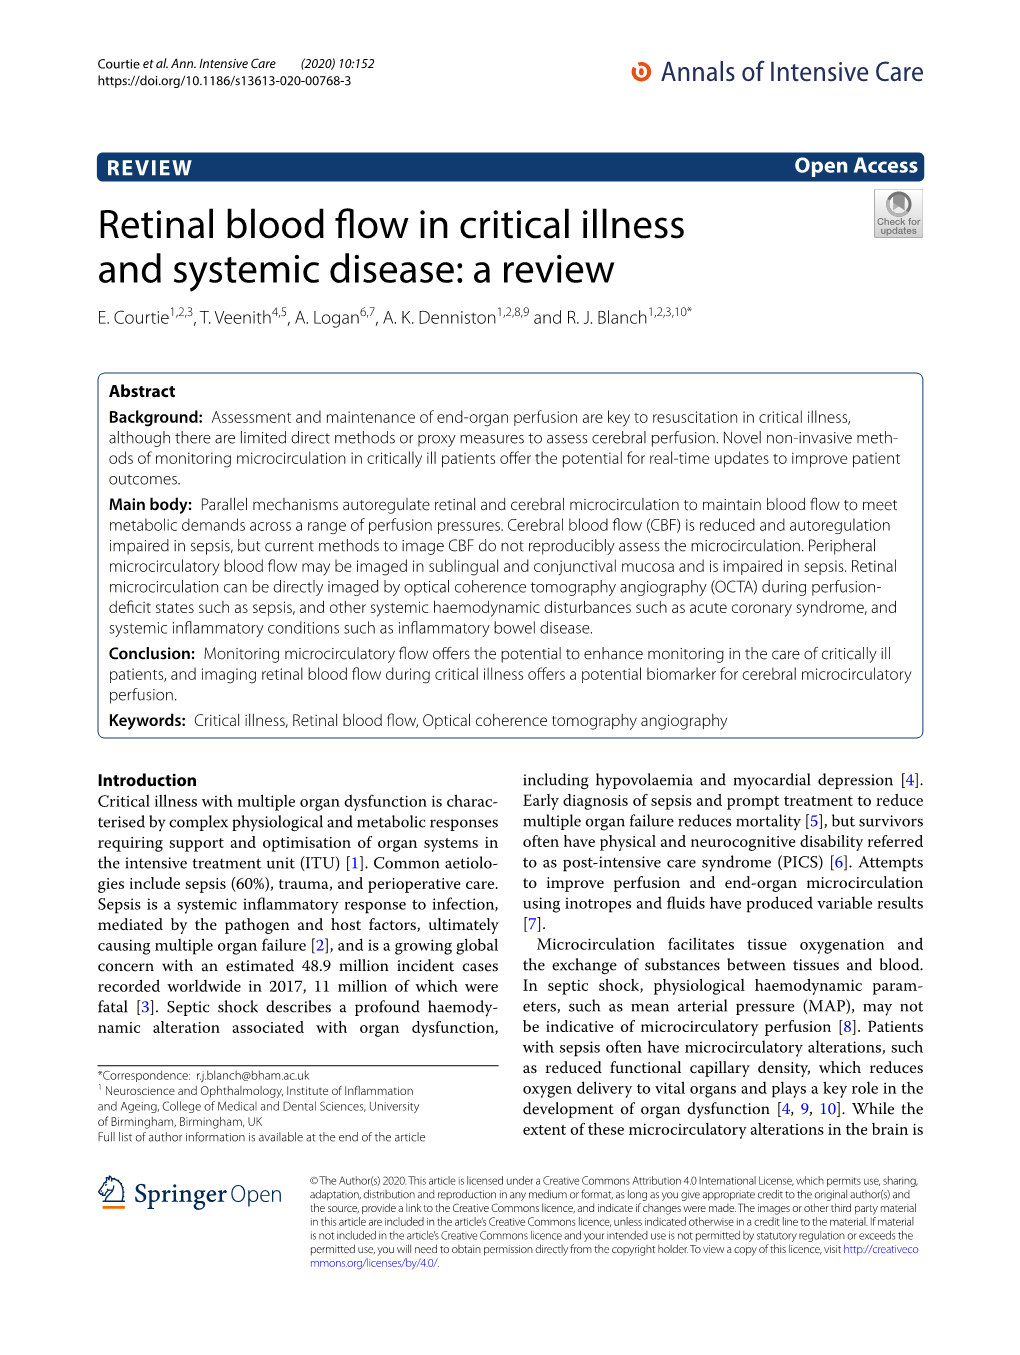 Retinal Blood Flow in Critical Illness and Systemic Disease: a Review